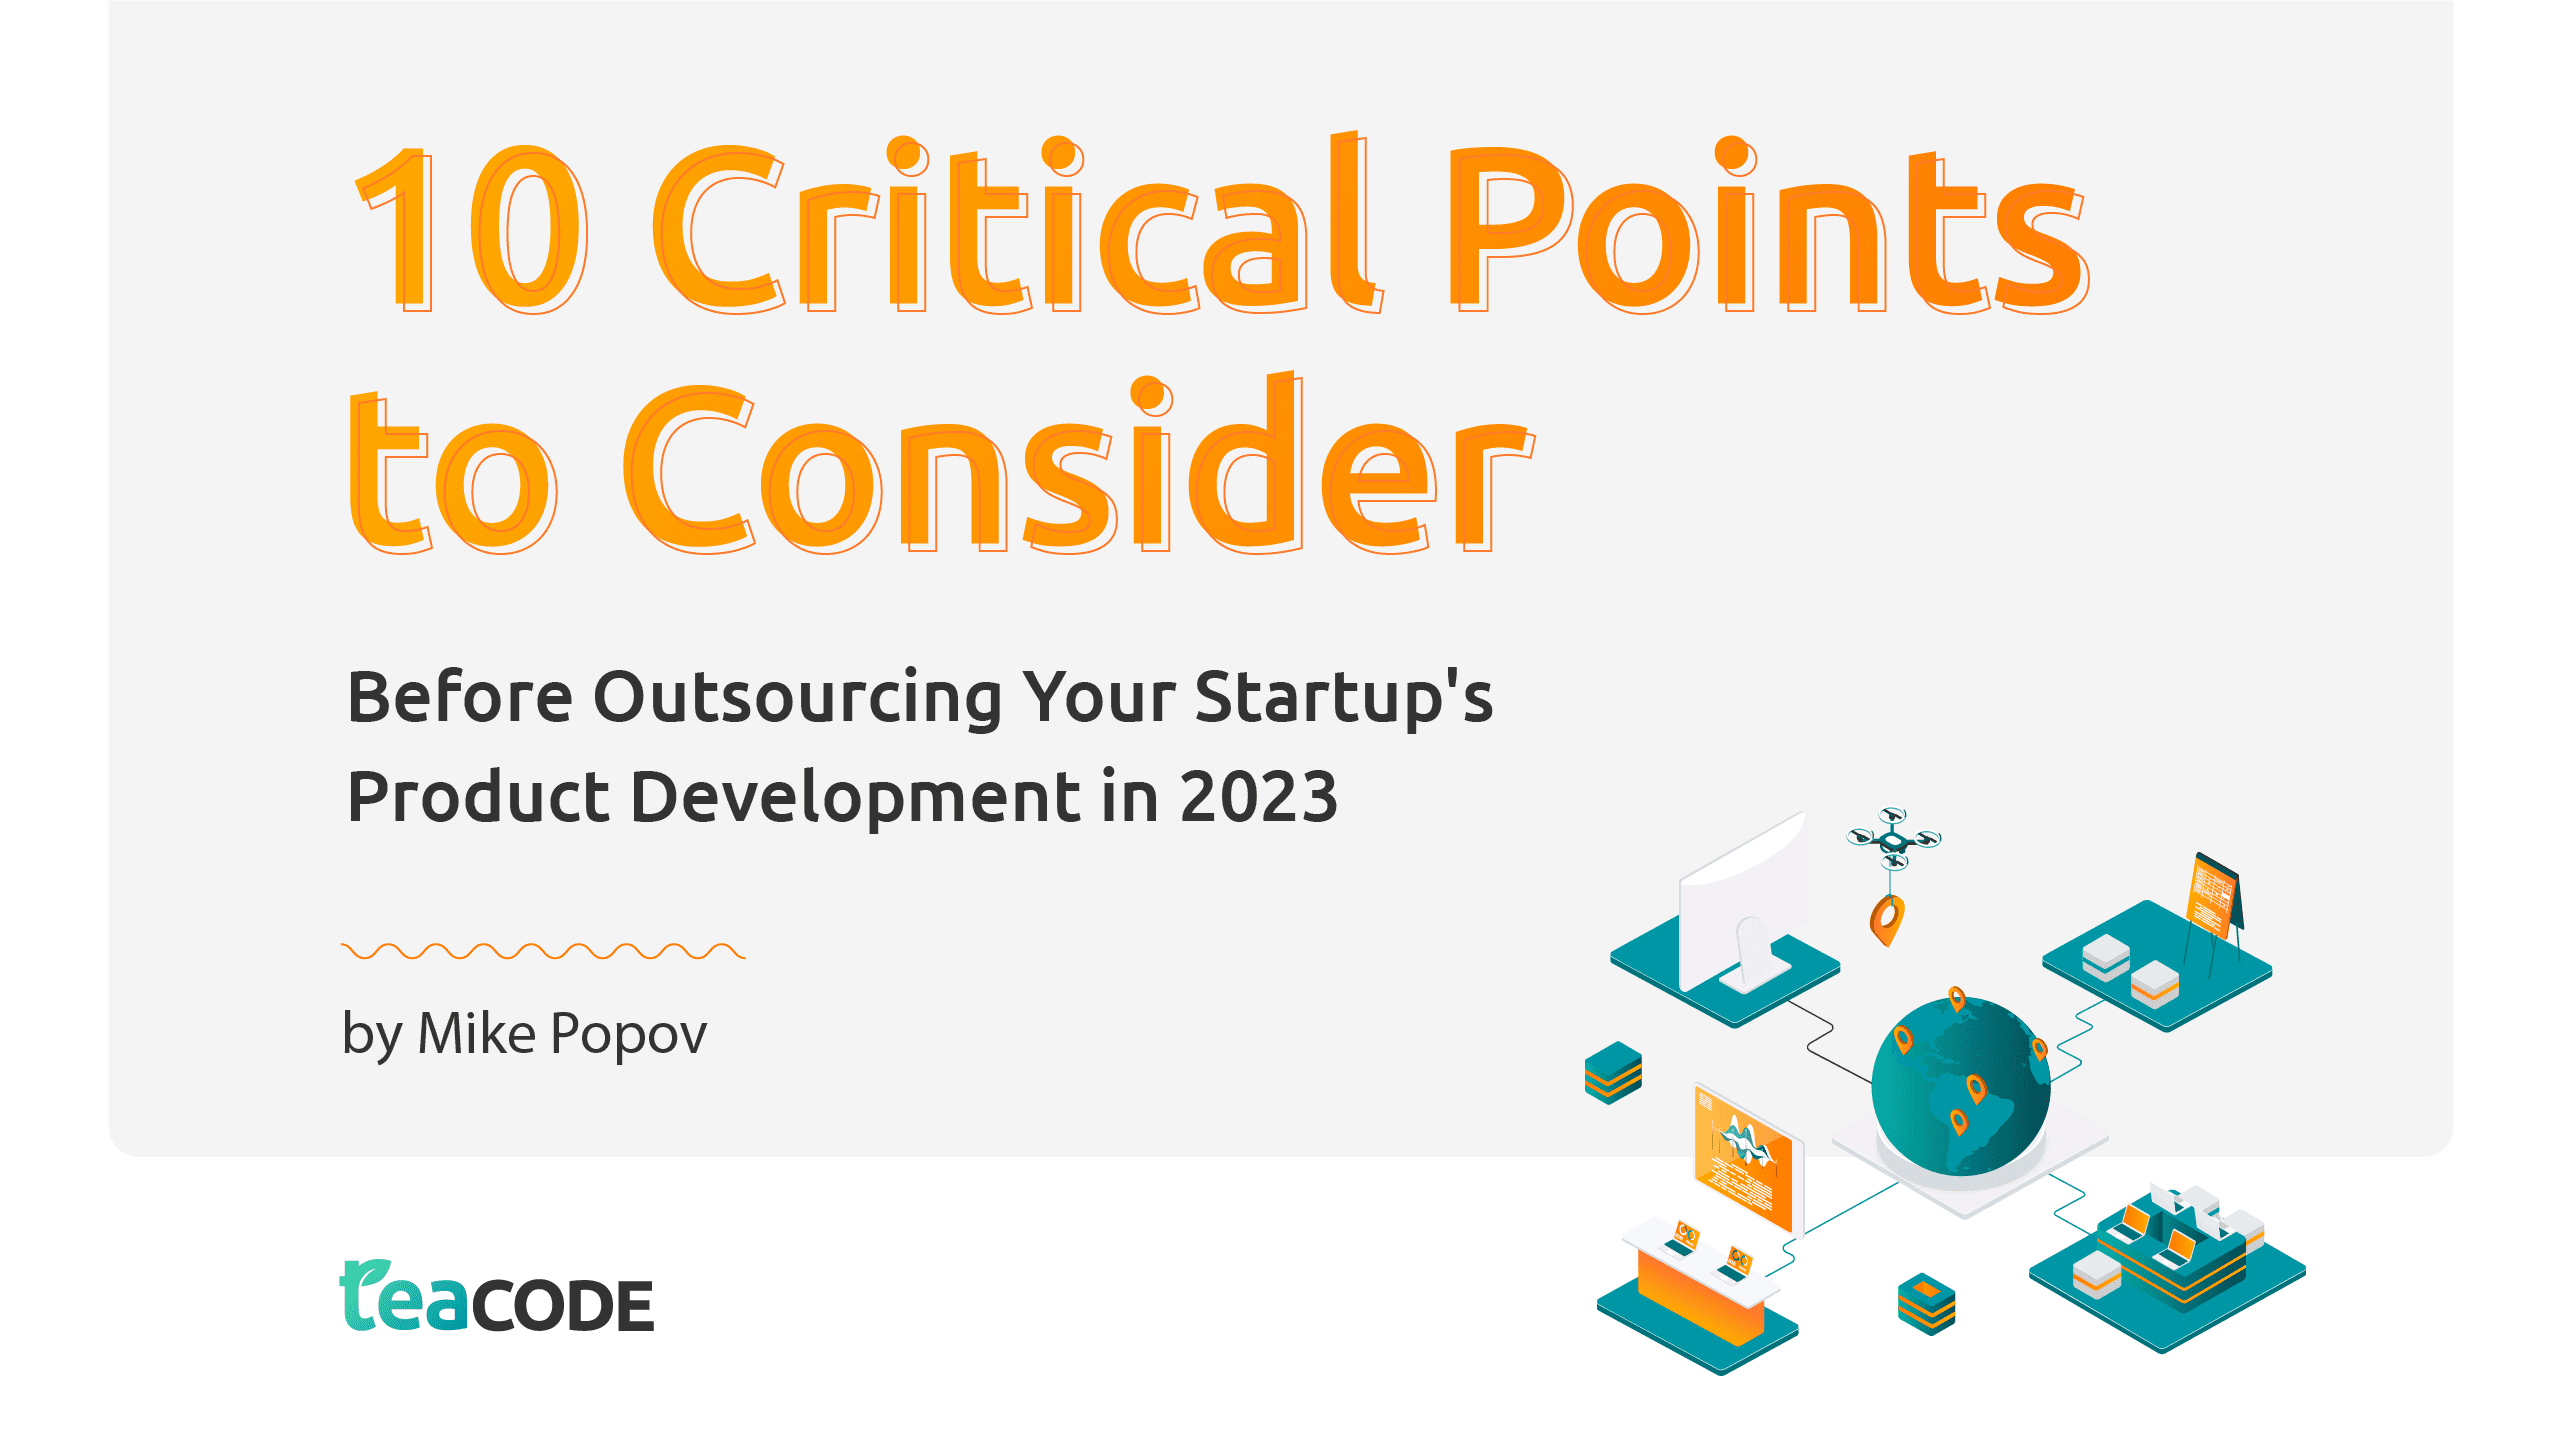 10 Critical Points to Consider Before Outsourcing Your Startup’s Product Development in 2023